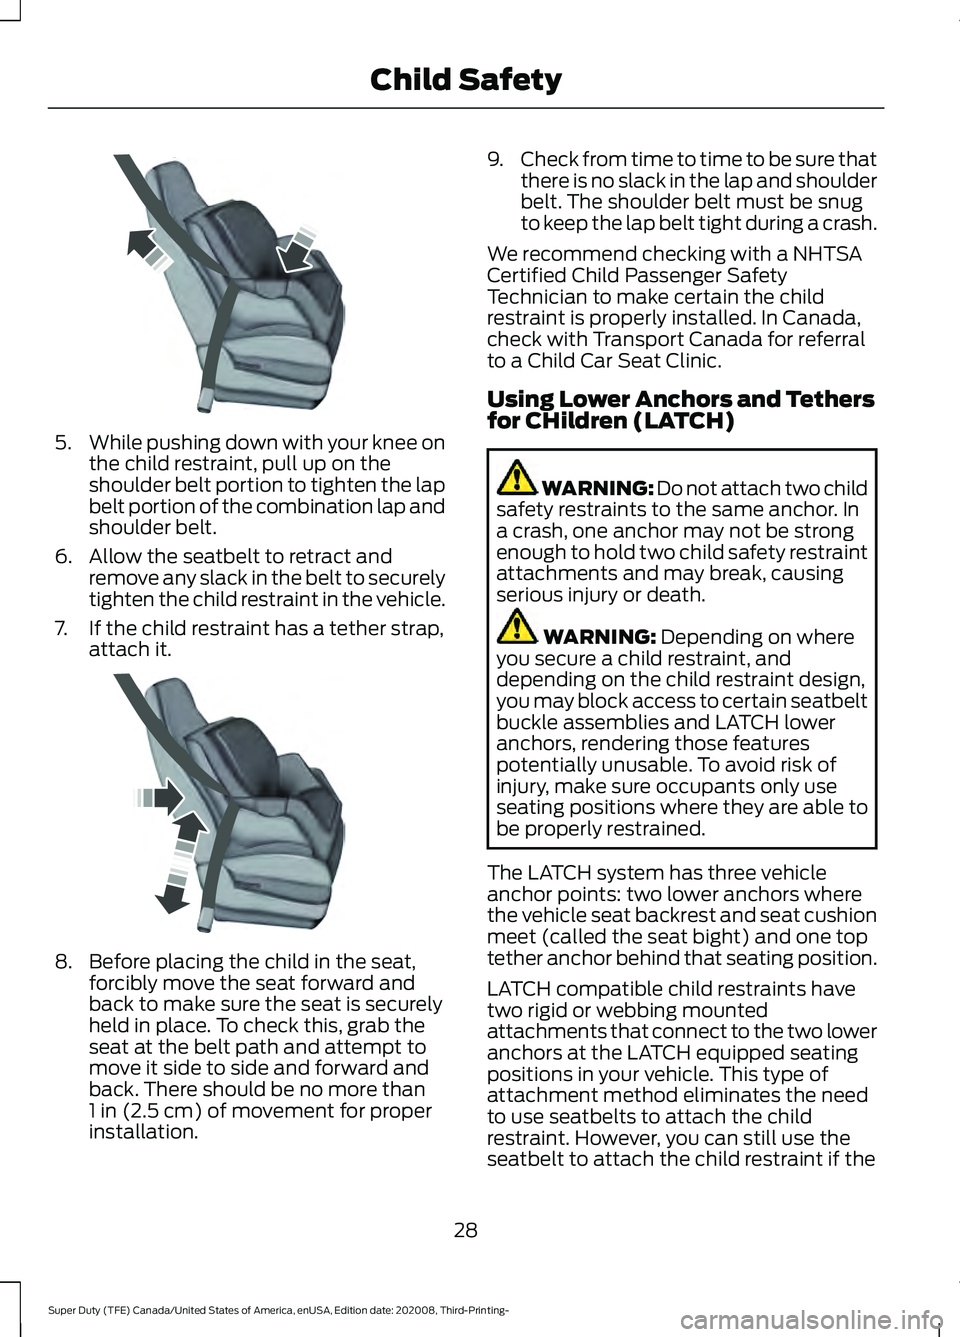 FORD F-250 2021  Owners Manual 5.
While pushing down with your knee on
the child restraint, pull up on the
shoulder belt portion to tighten the lap
belt portion of the combination lap and
shoulder belt.
6. Allow the seatbelt to ret